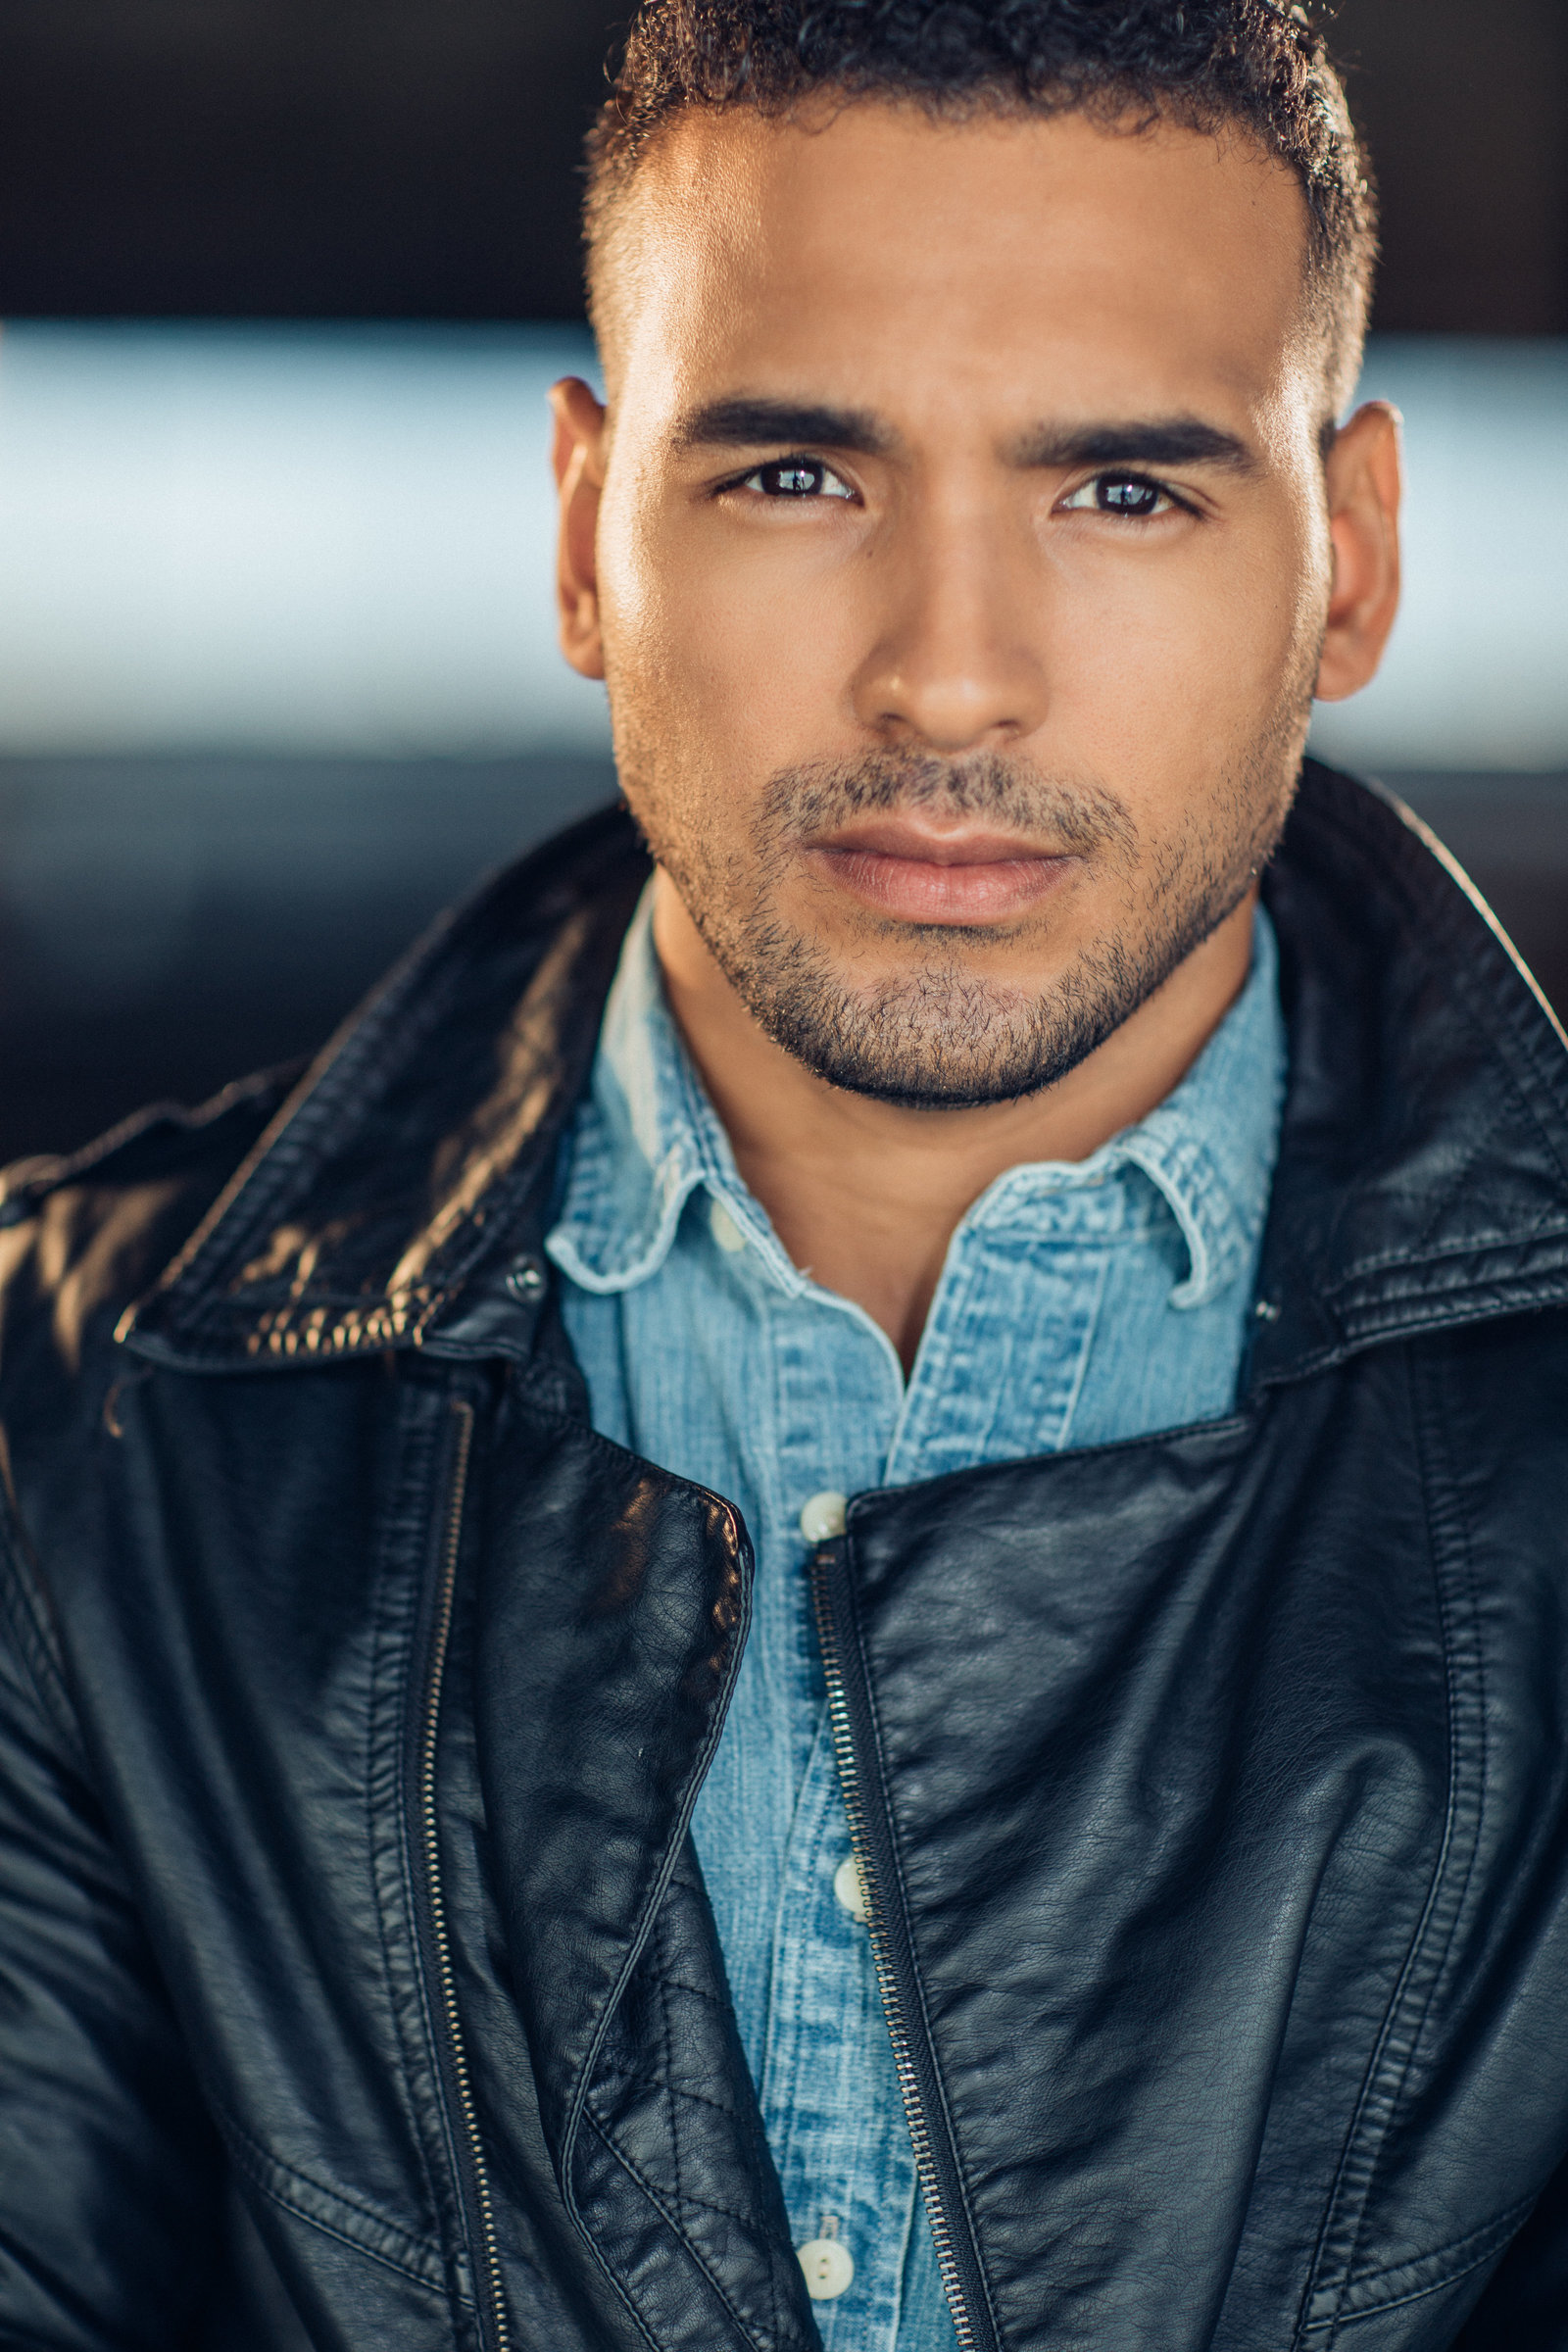 Headshot Photo Of Young Man In Black Leather Jacket And Blue Denim Polo